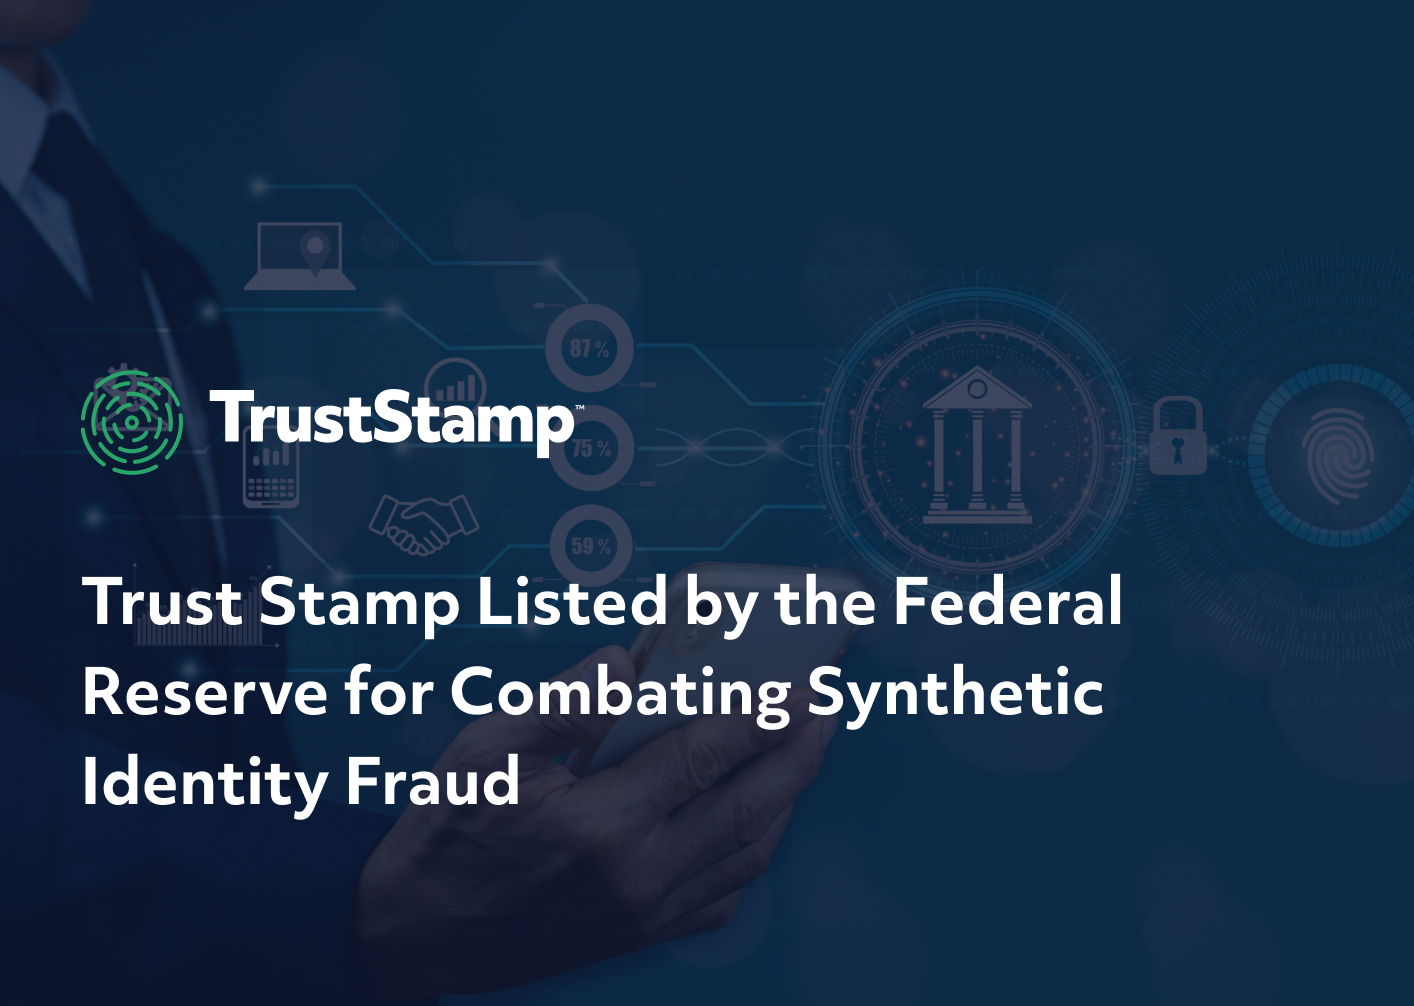 federal-reserve-lists-trust-stamp-for-synthetic-fraud-combat